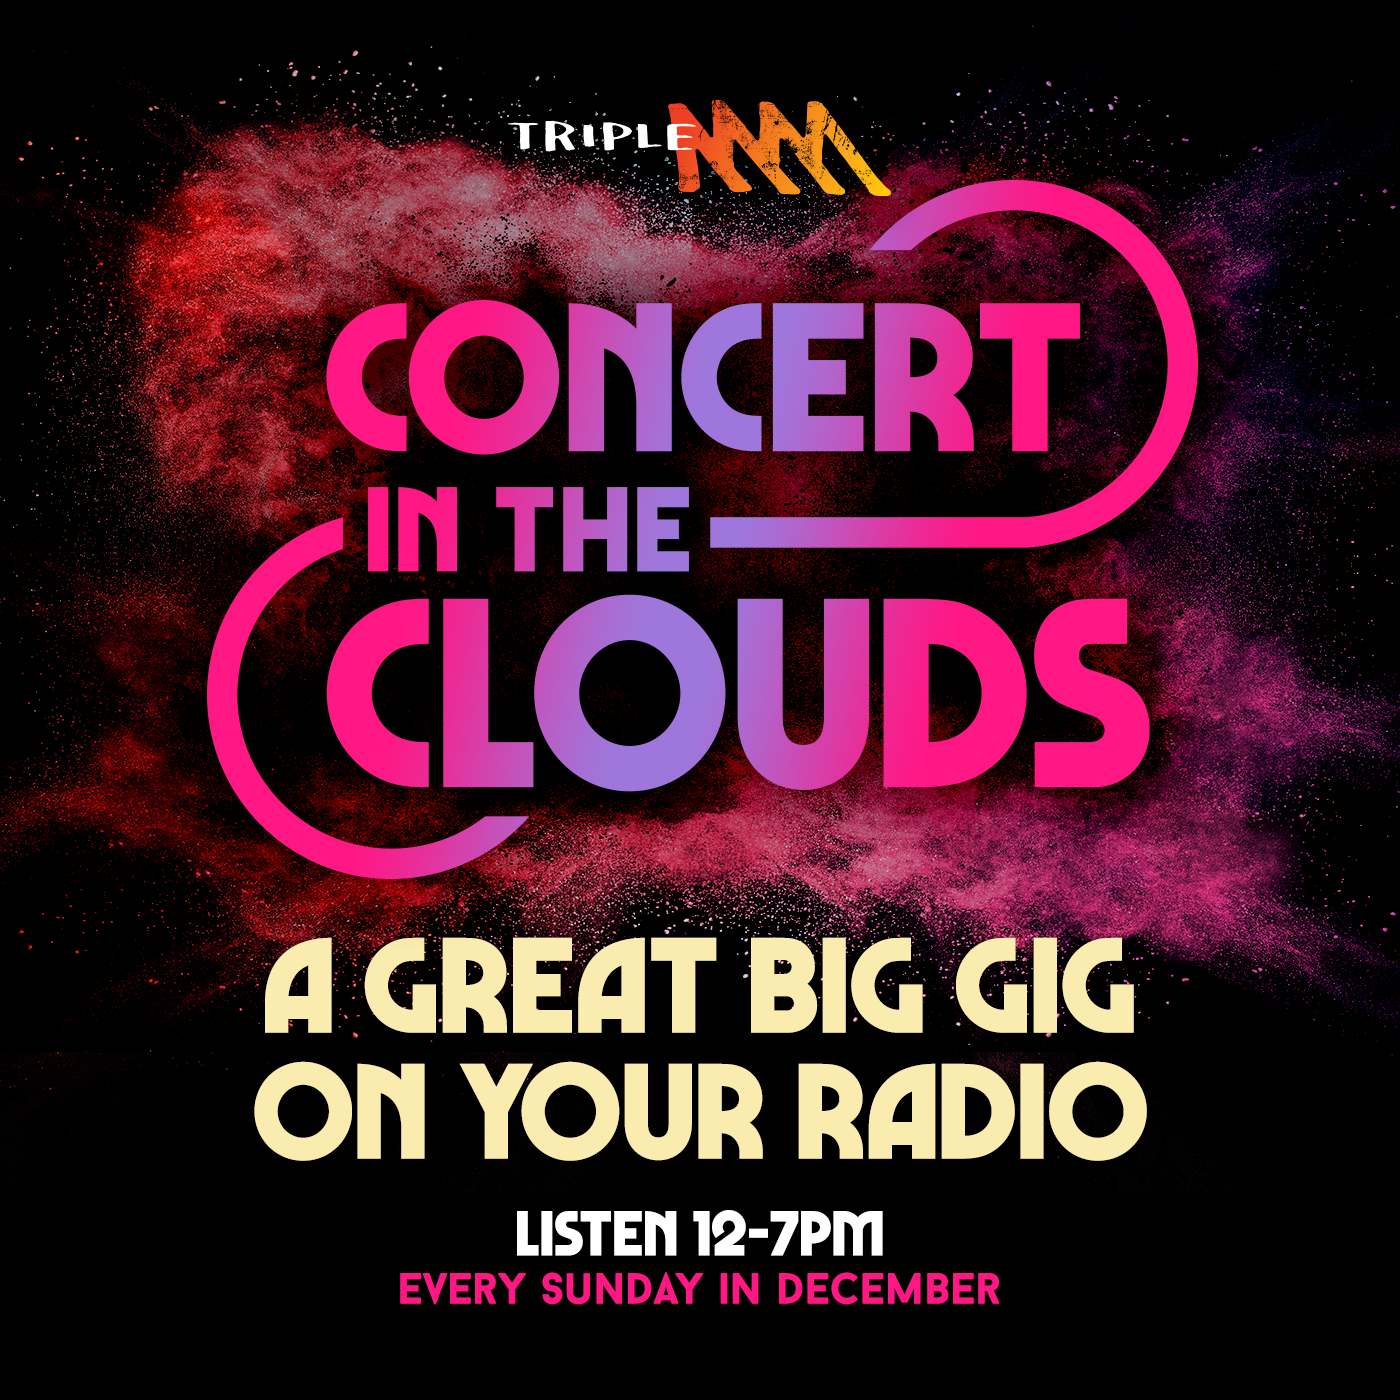 "The most beautiful songs in the world" As Crowded House hit Concert In The Clouds, Wil Anderson shares why it's so special seeing the band live